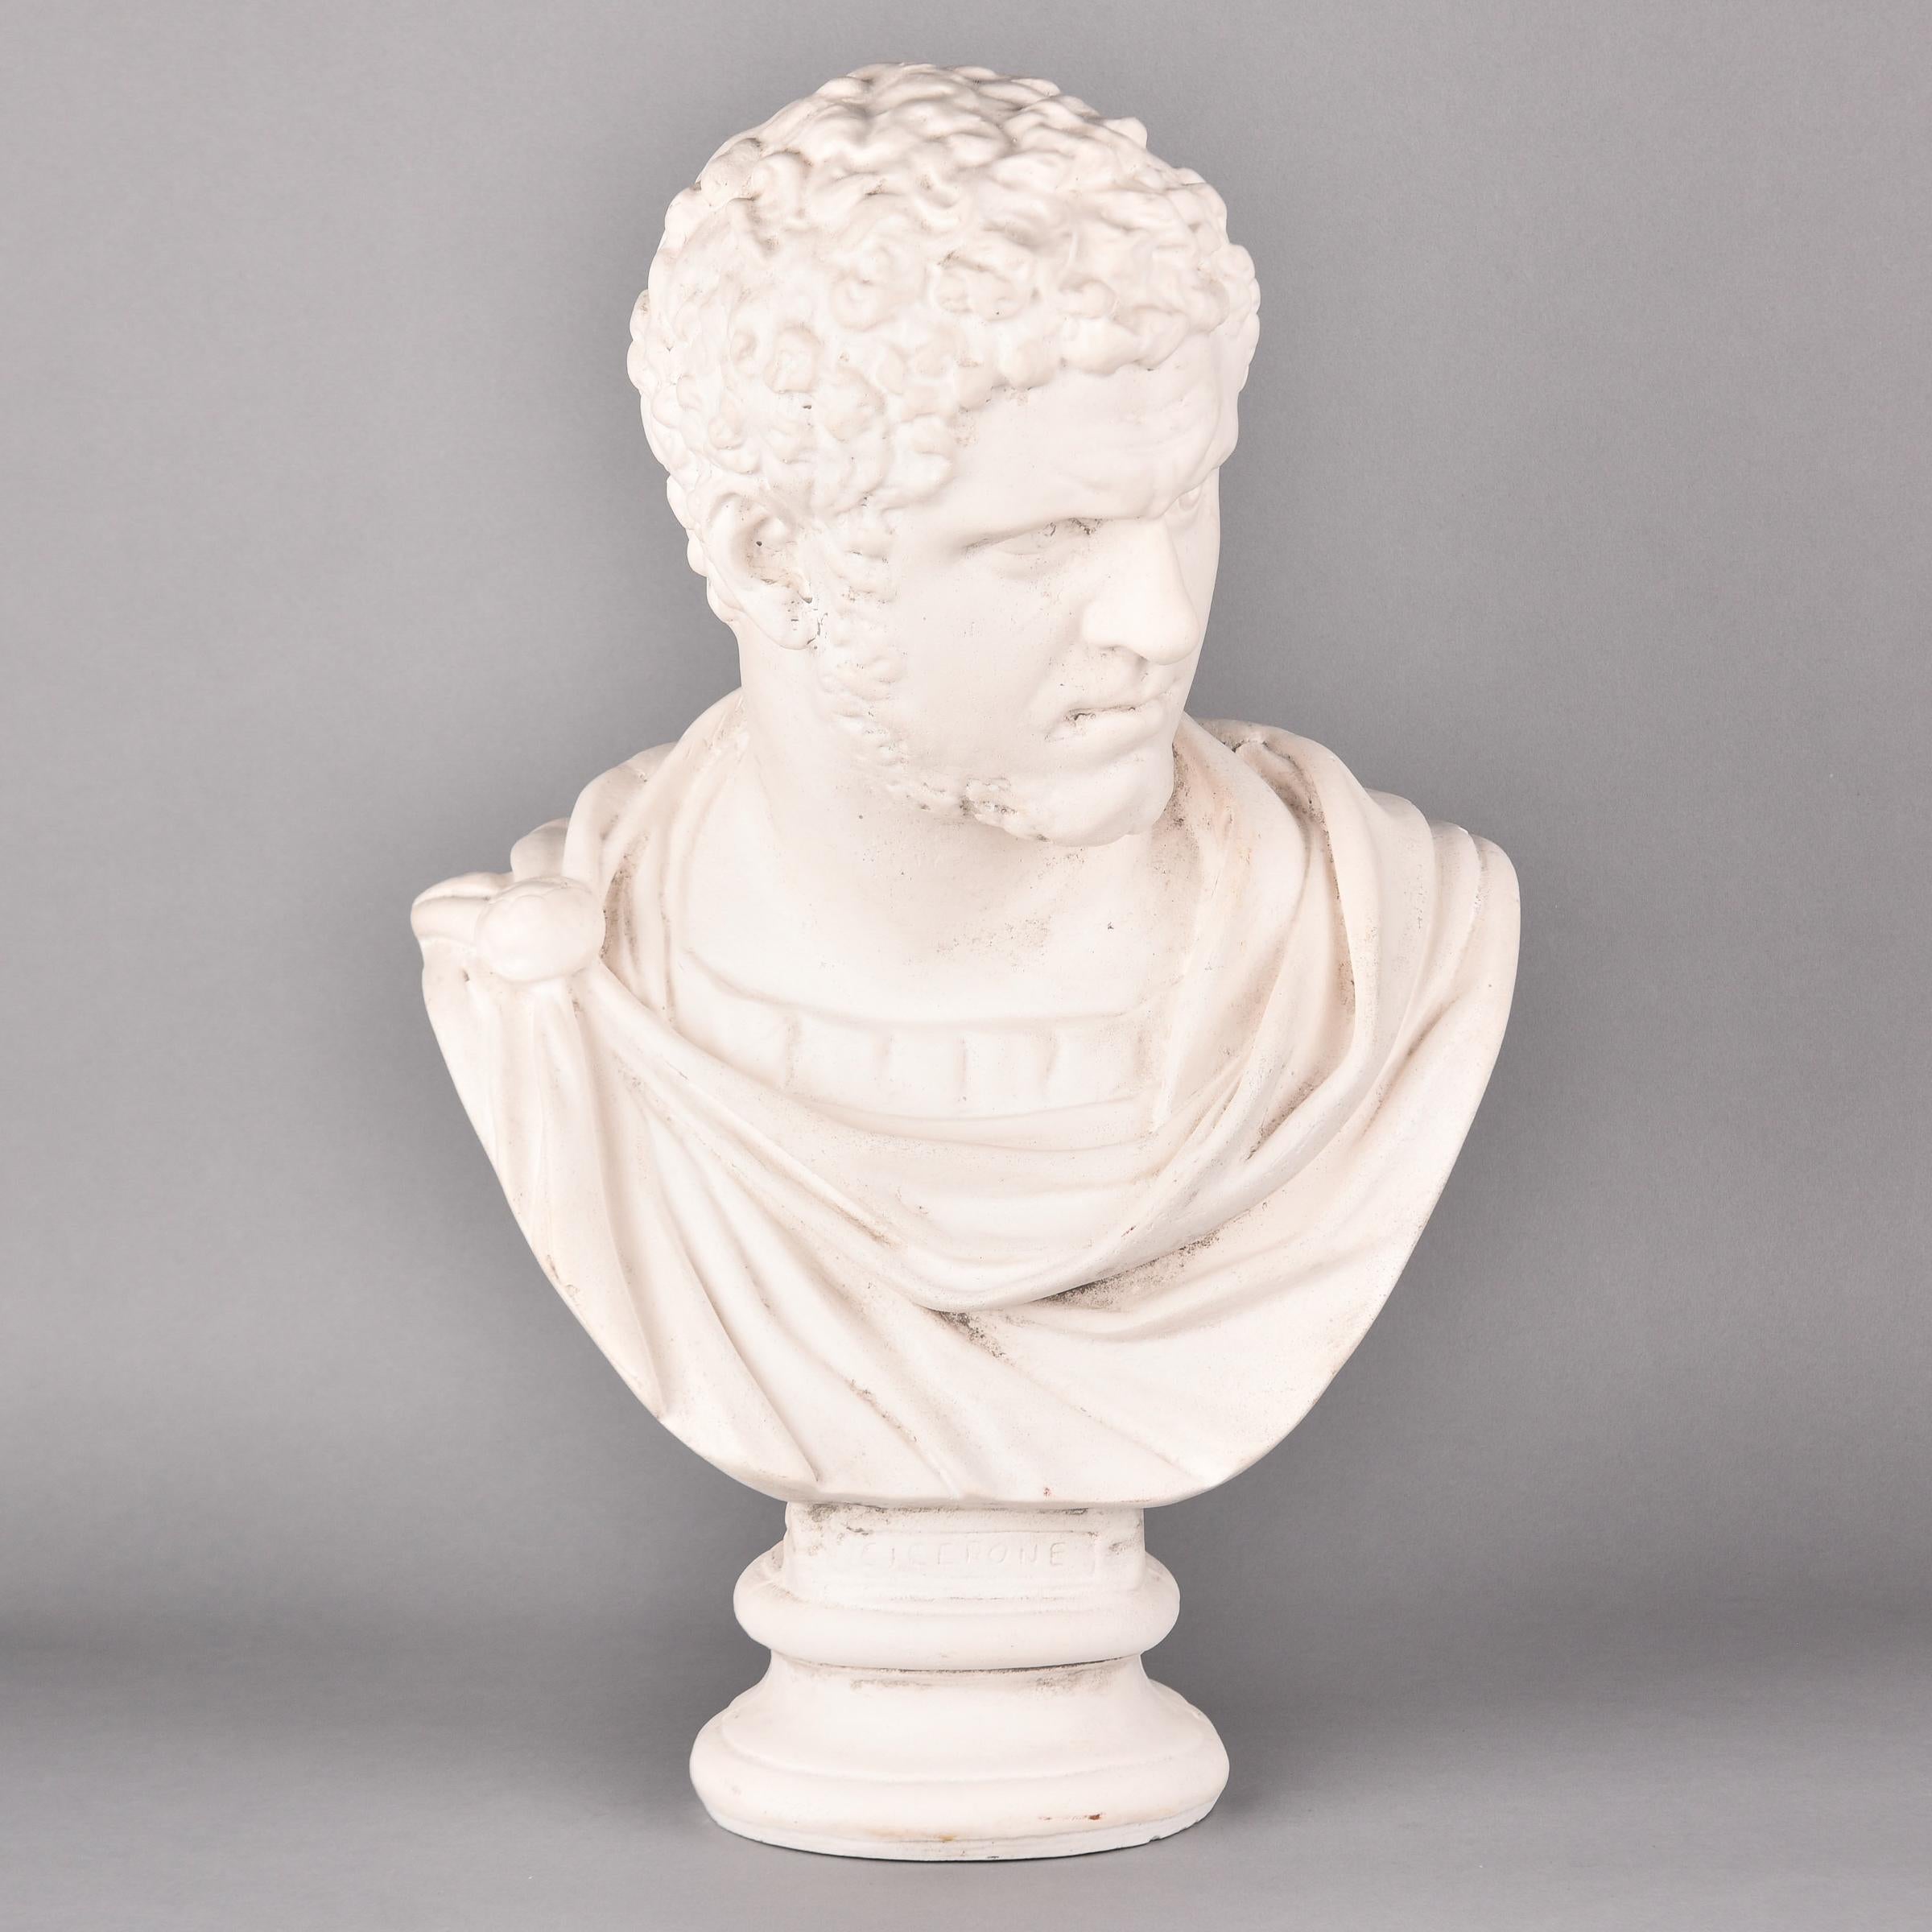 Found in England, this vintage plaster composite bust of Marcus Cicero dates from the 1980s. Classic Roman bust is a timeless piece. Unknown maker. Very good vintage condition. 